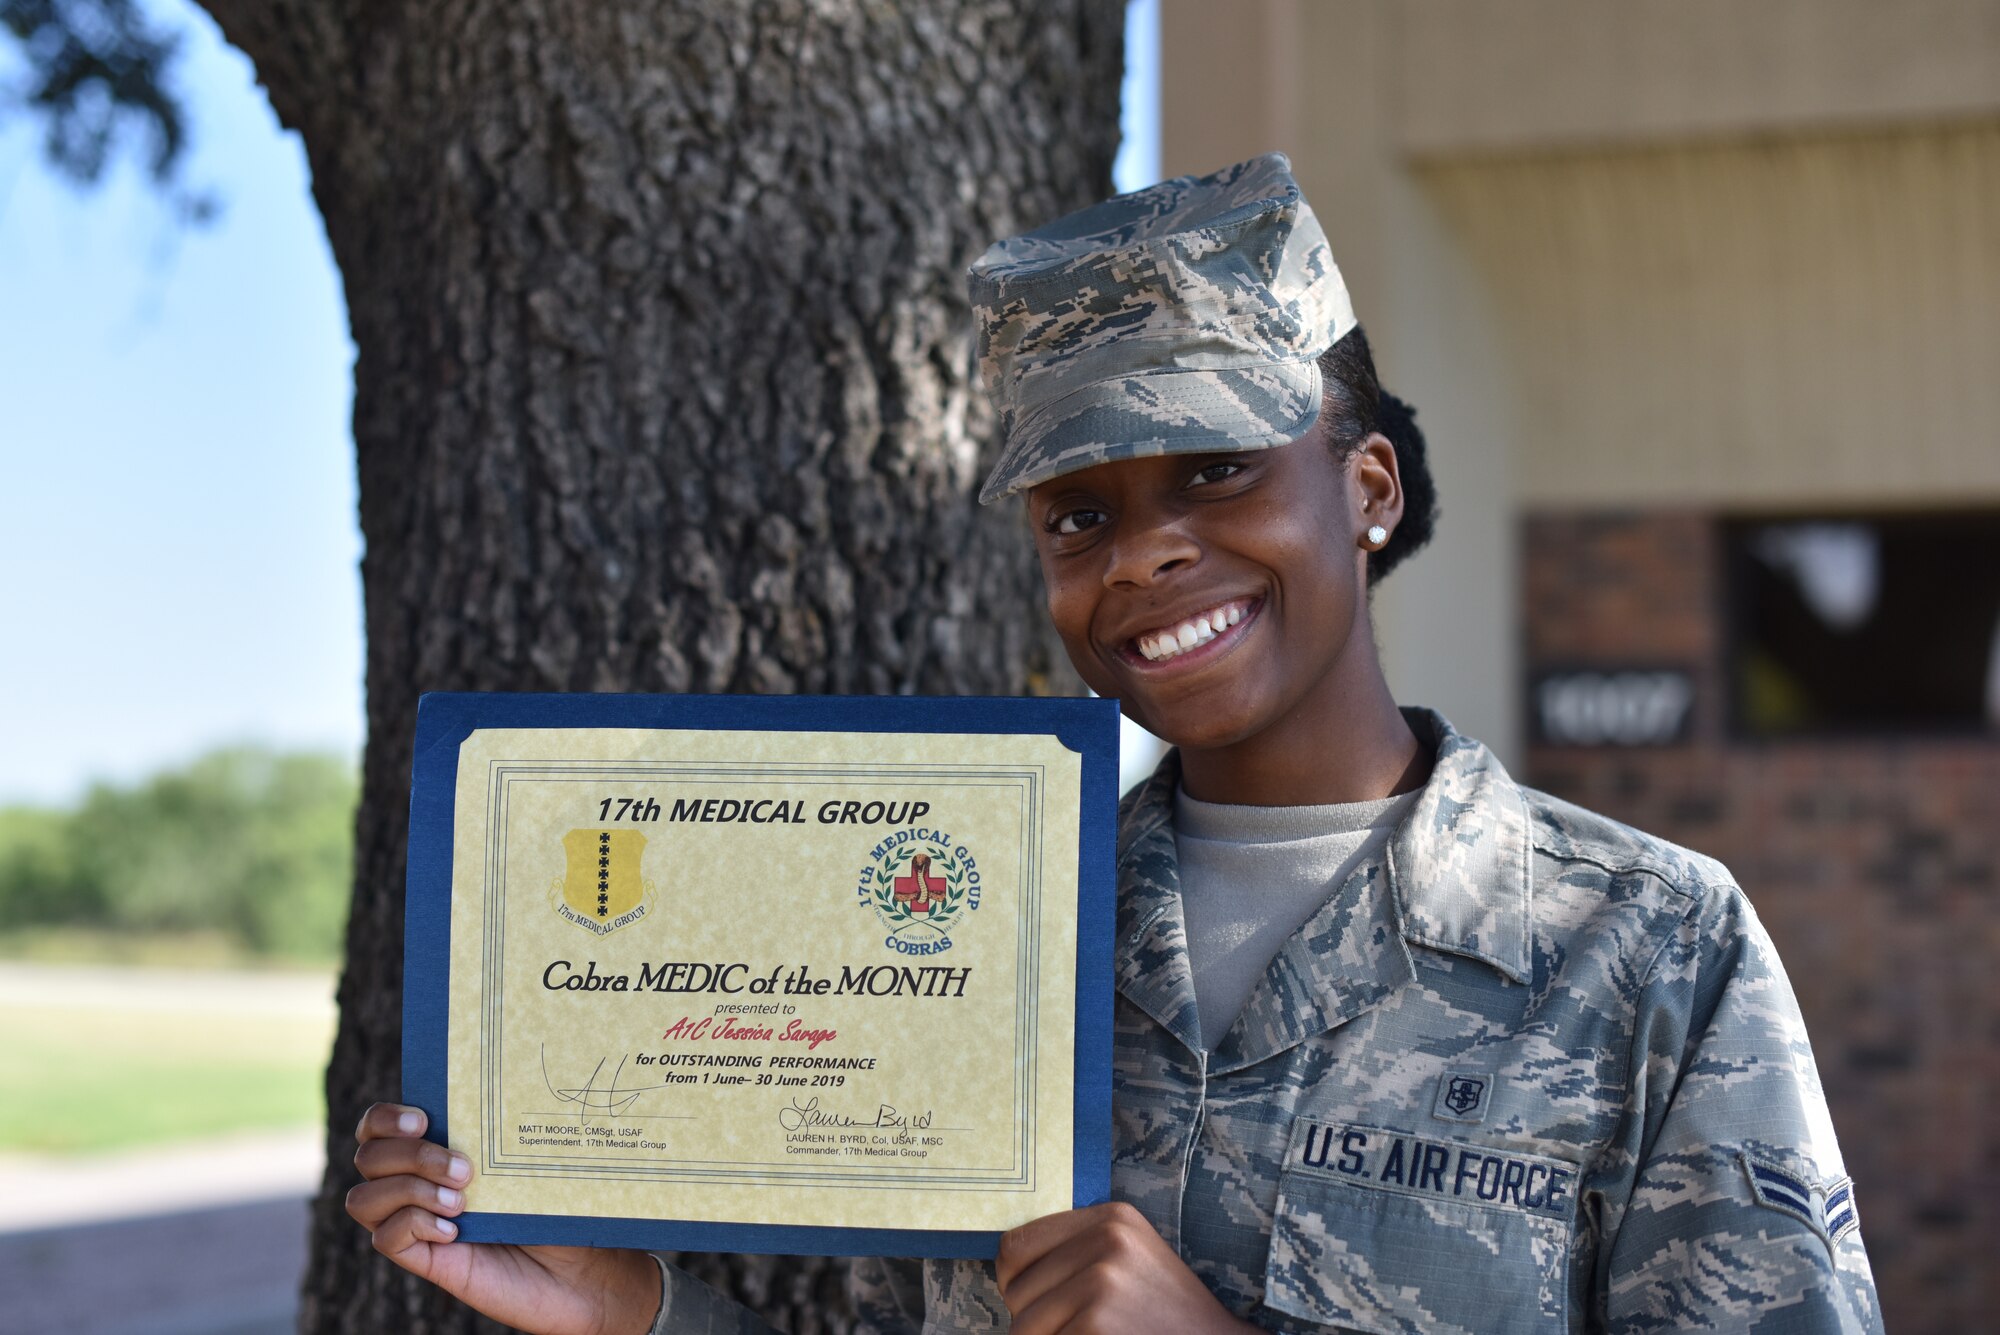 U.S. Air Force Airman 1st Class Jessica Savage, 17th Medical Support Squadron referrals management clerk, stands under a tree outside the Ross Clinic on Goodfellow Air Force Base, Texas, July 15, 2019. Savage was selected by her supervisors and leadership as the June Medic of the Month due to her exceeding their standards of professionalism. (U.S. Air Force photo by Senior Airman Seraiah Wolf/Released)